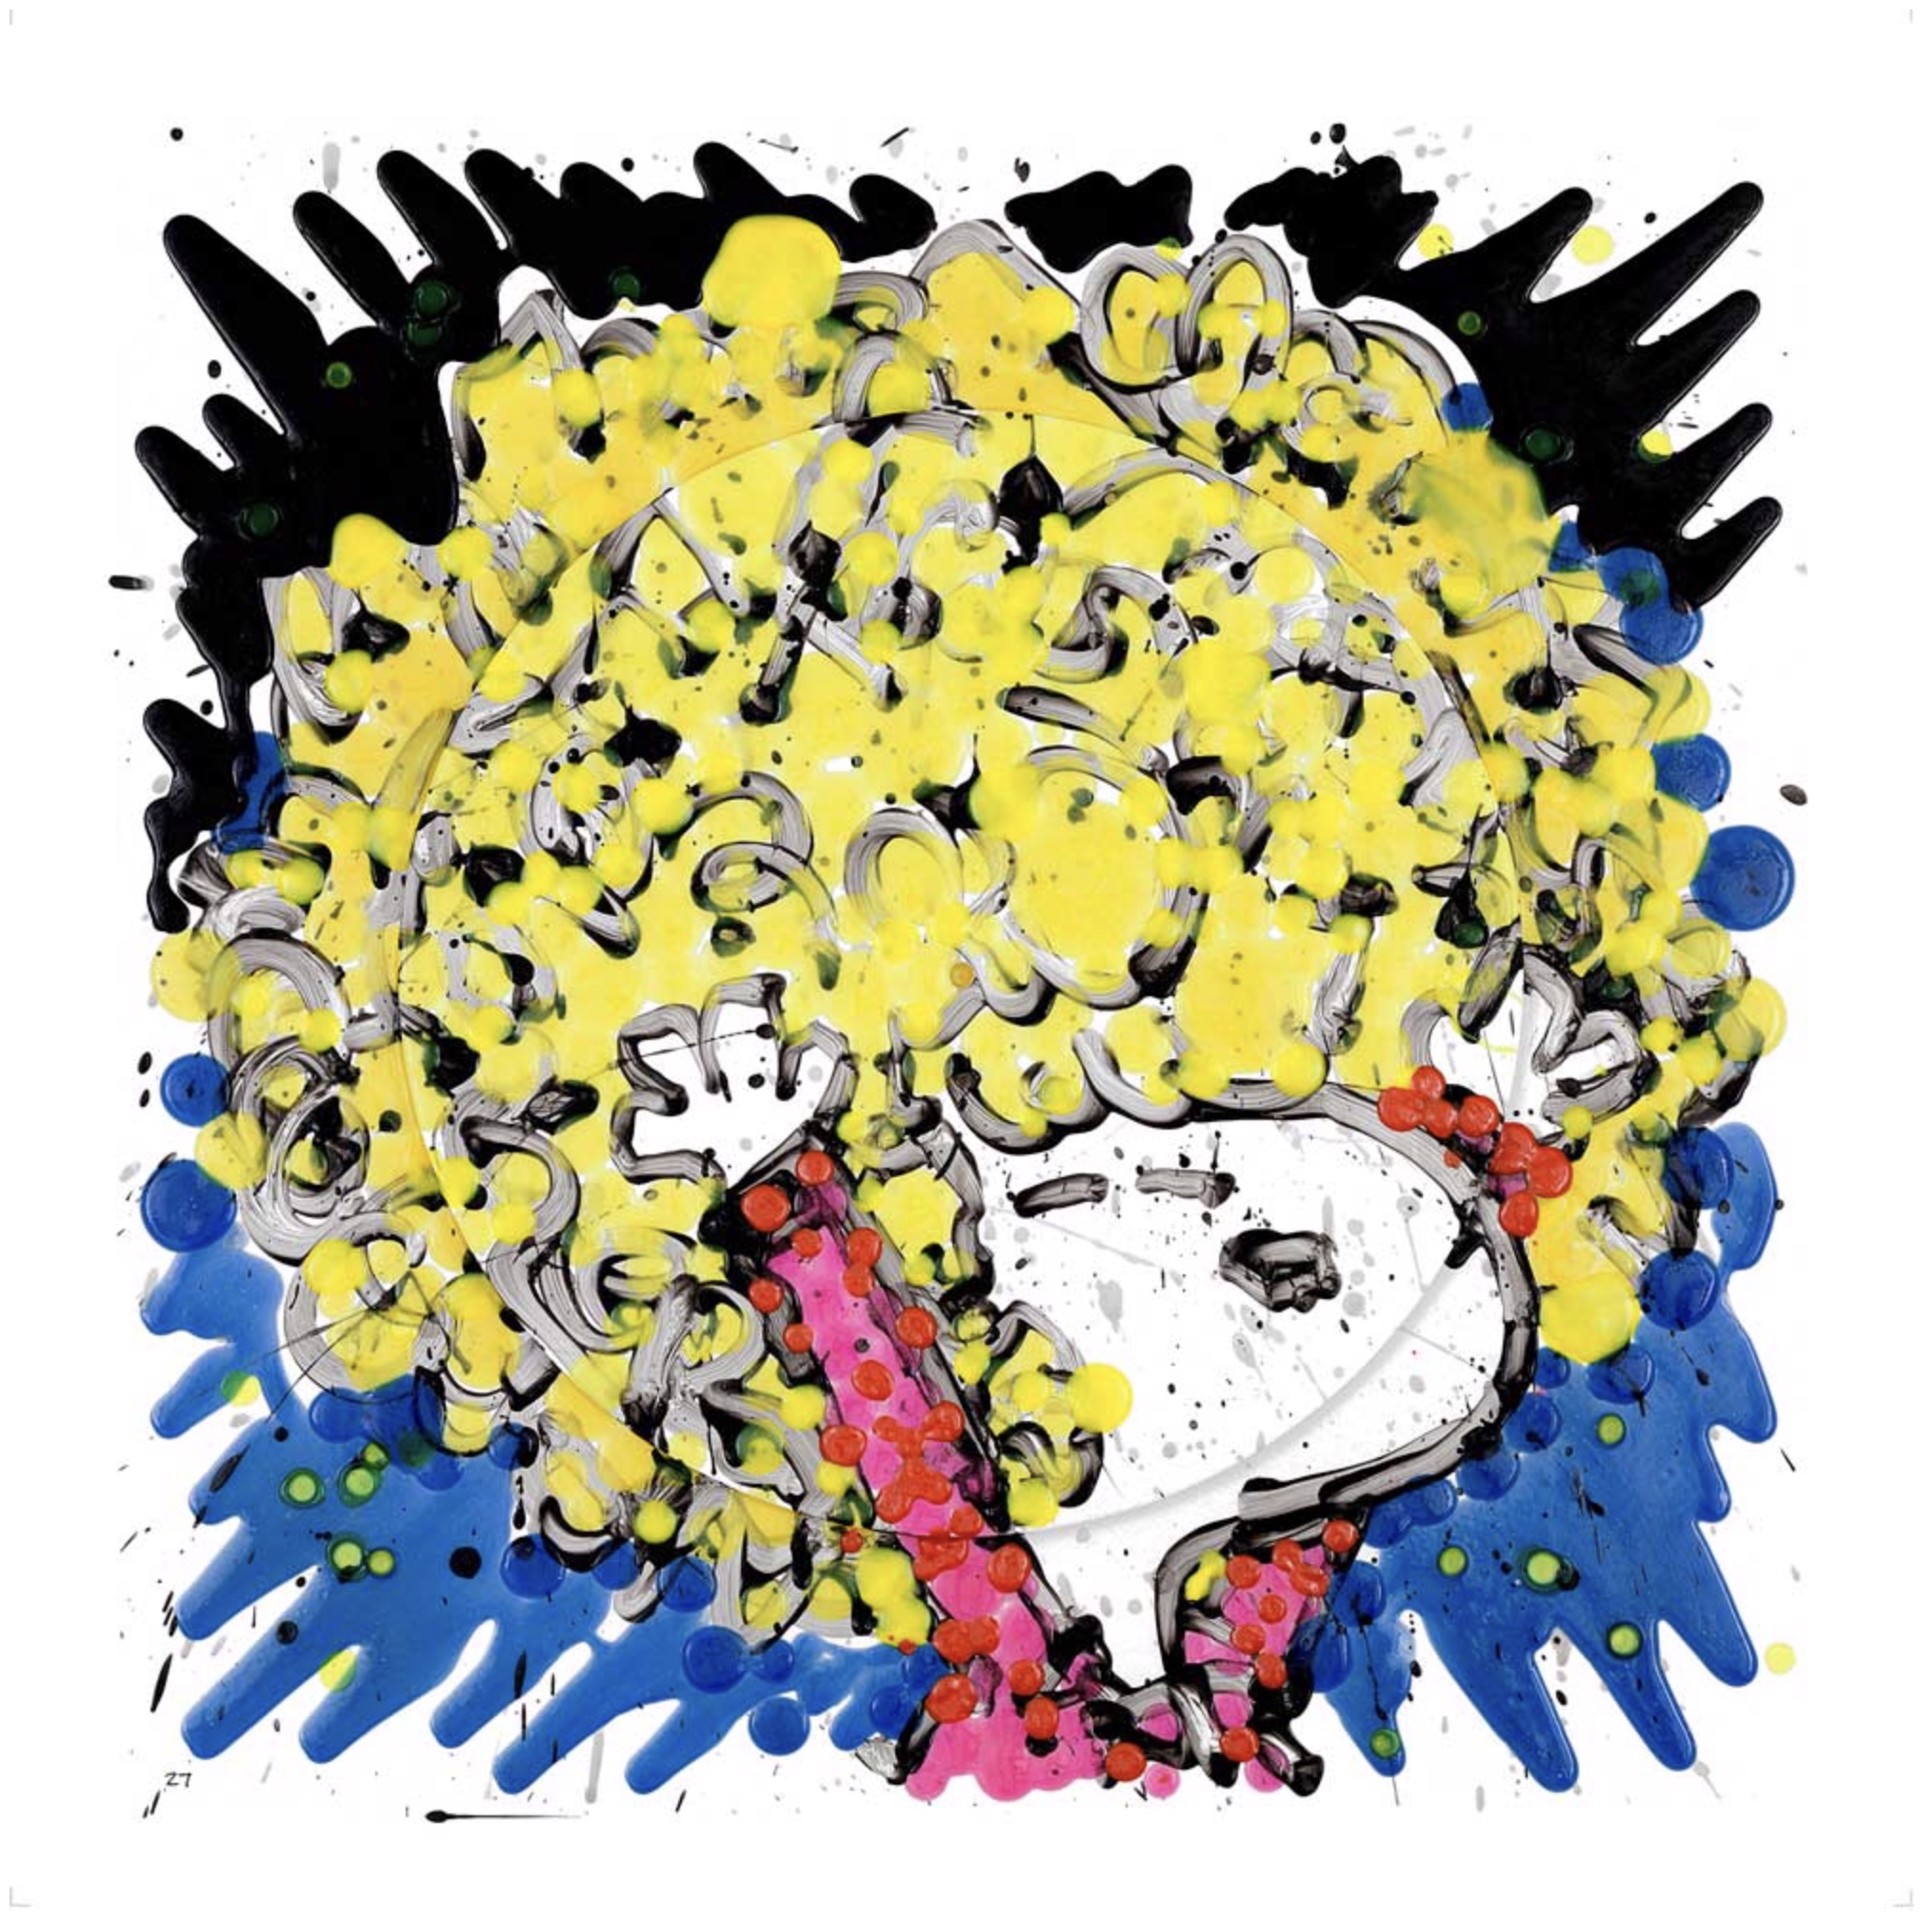 Mirror Mirror On The Wall, Who’s The Top Dog Of Them All? by Tom Everhart